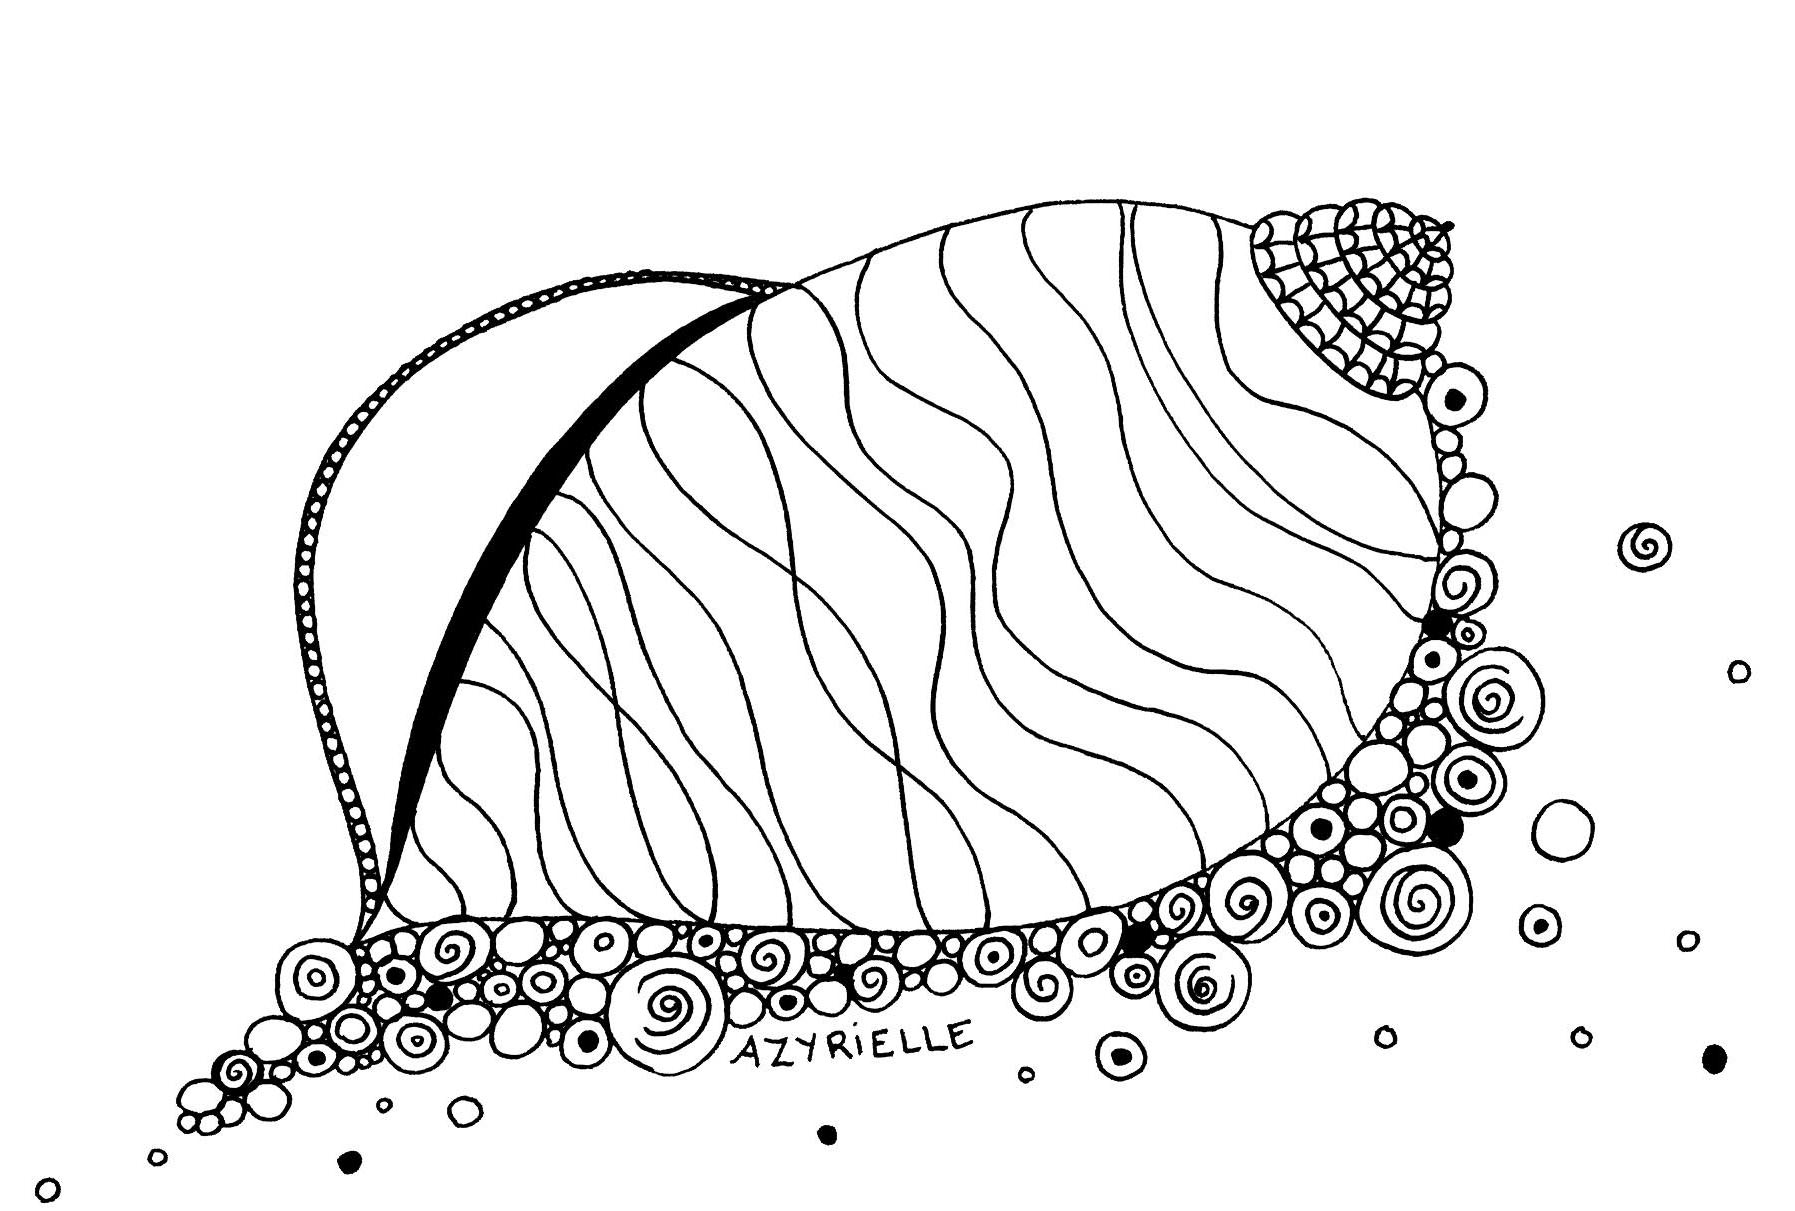 Funny coloring page representing a shell